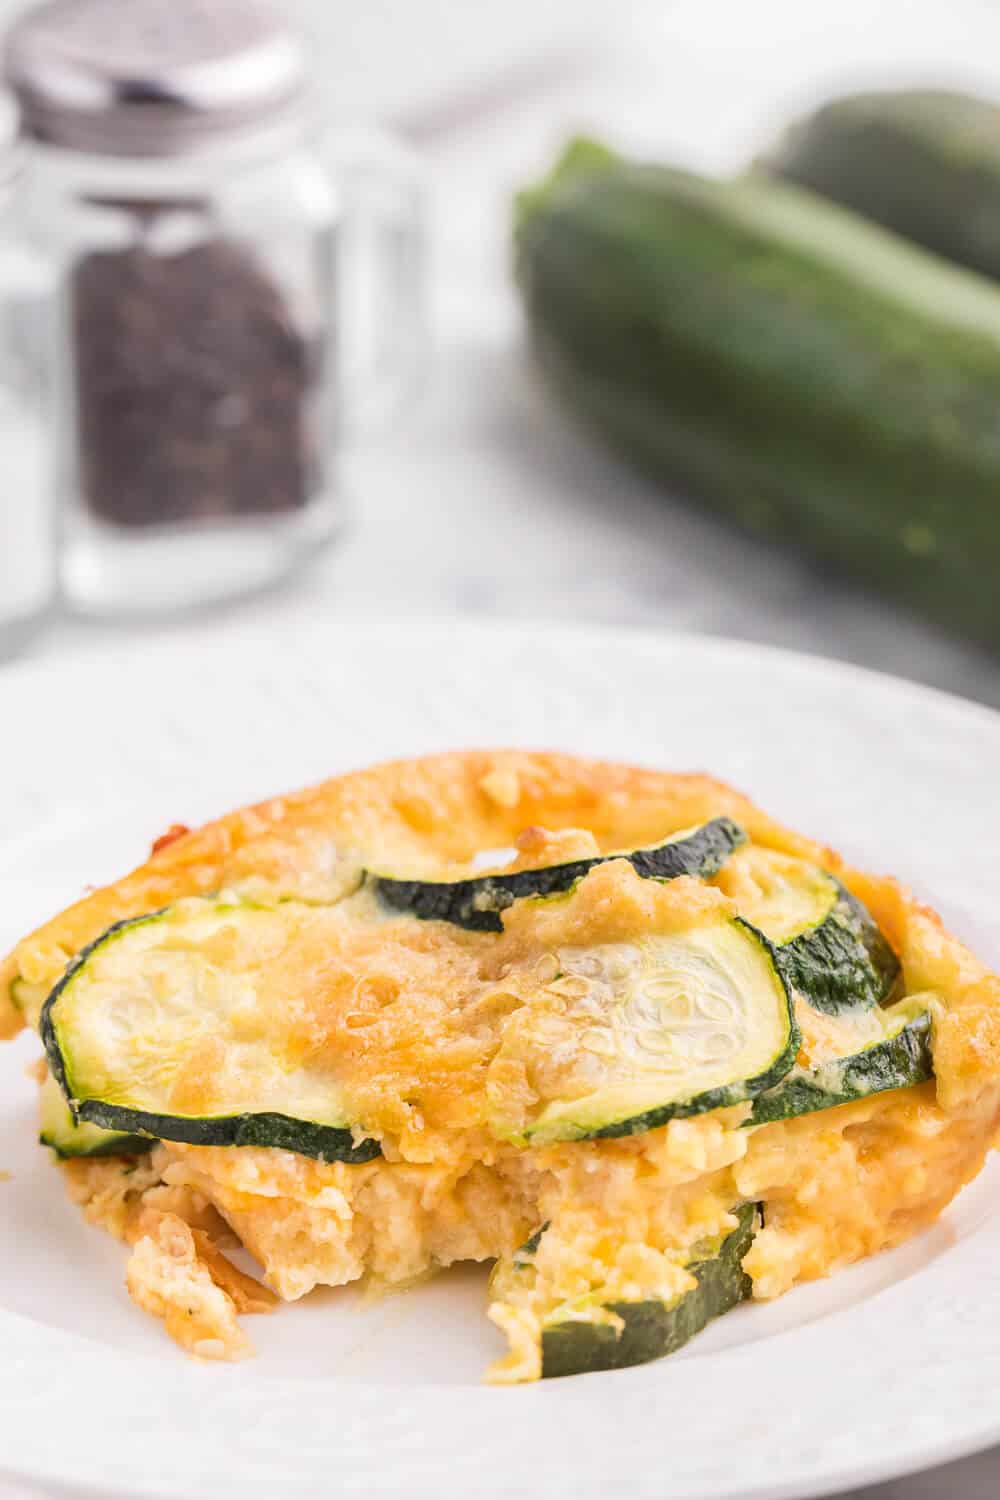 Baked Zucchini - An egg-based casserole with roasted zucchini slices, buttery crushed Ritz crackers and loads of cheese.